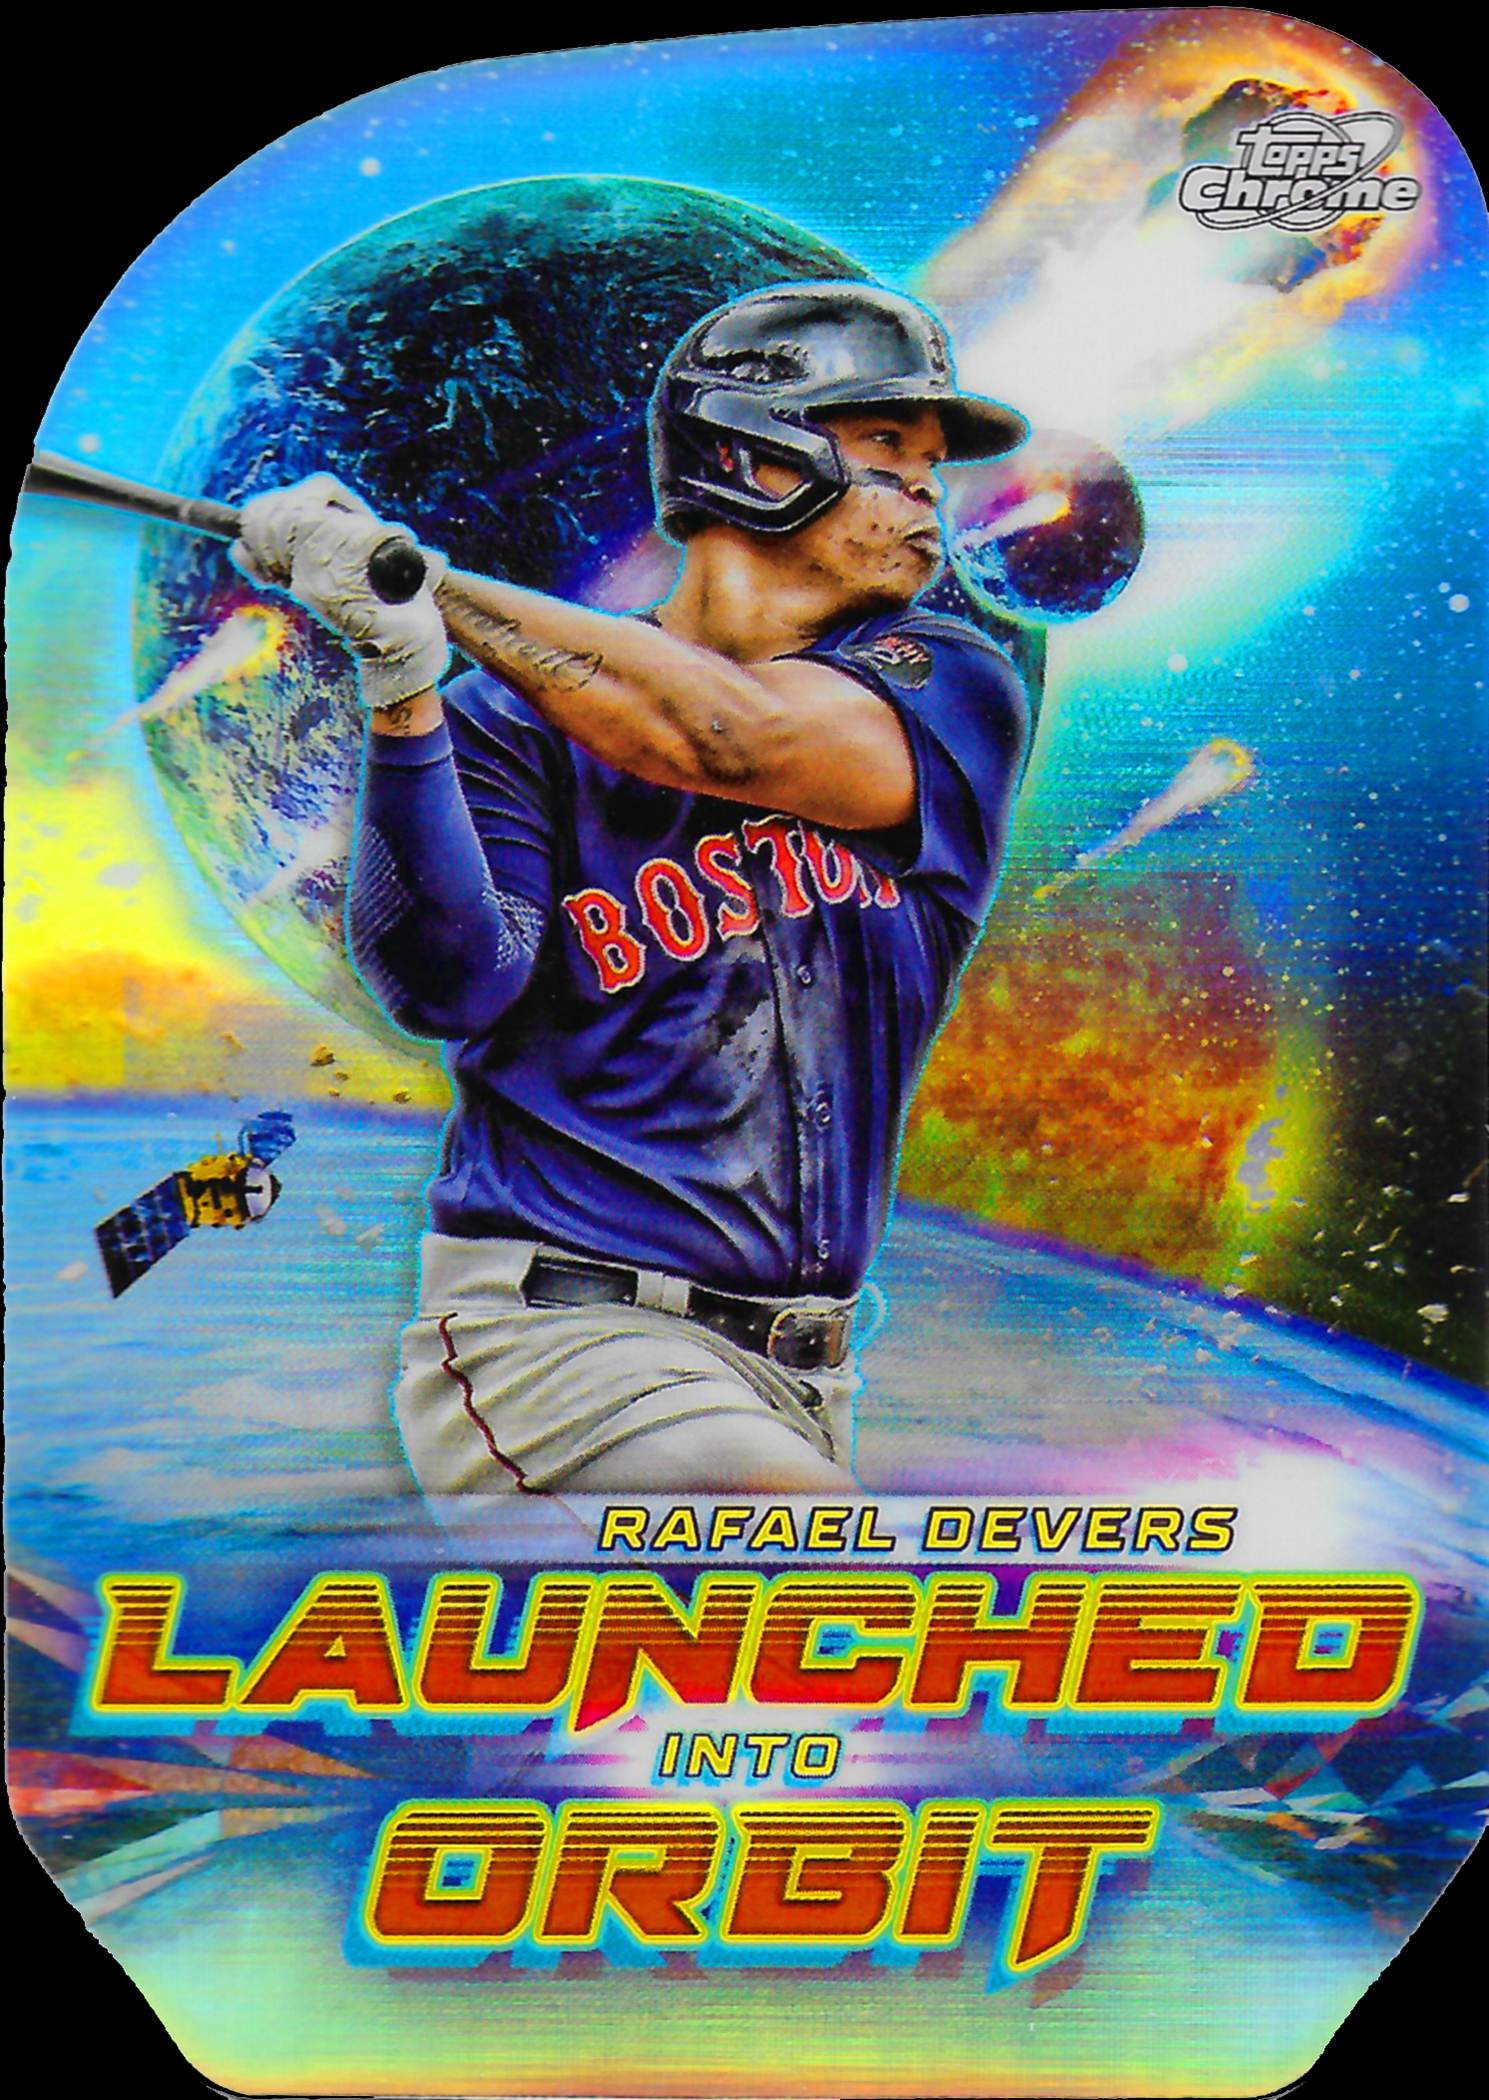 2023 Topps Cosmic Chrome Launched Into Orbit